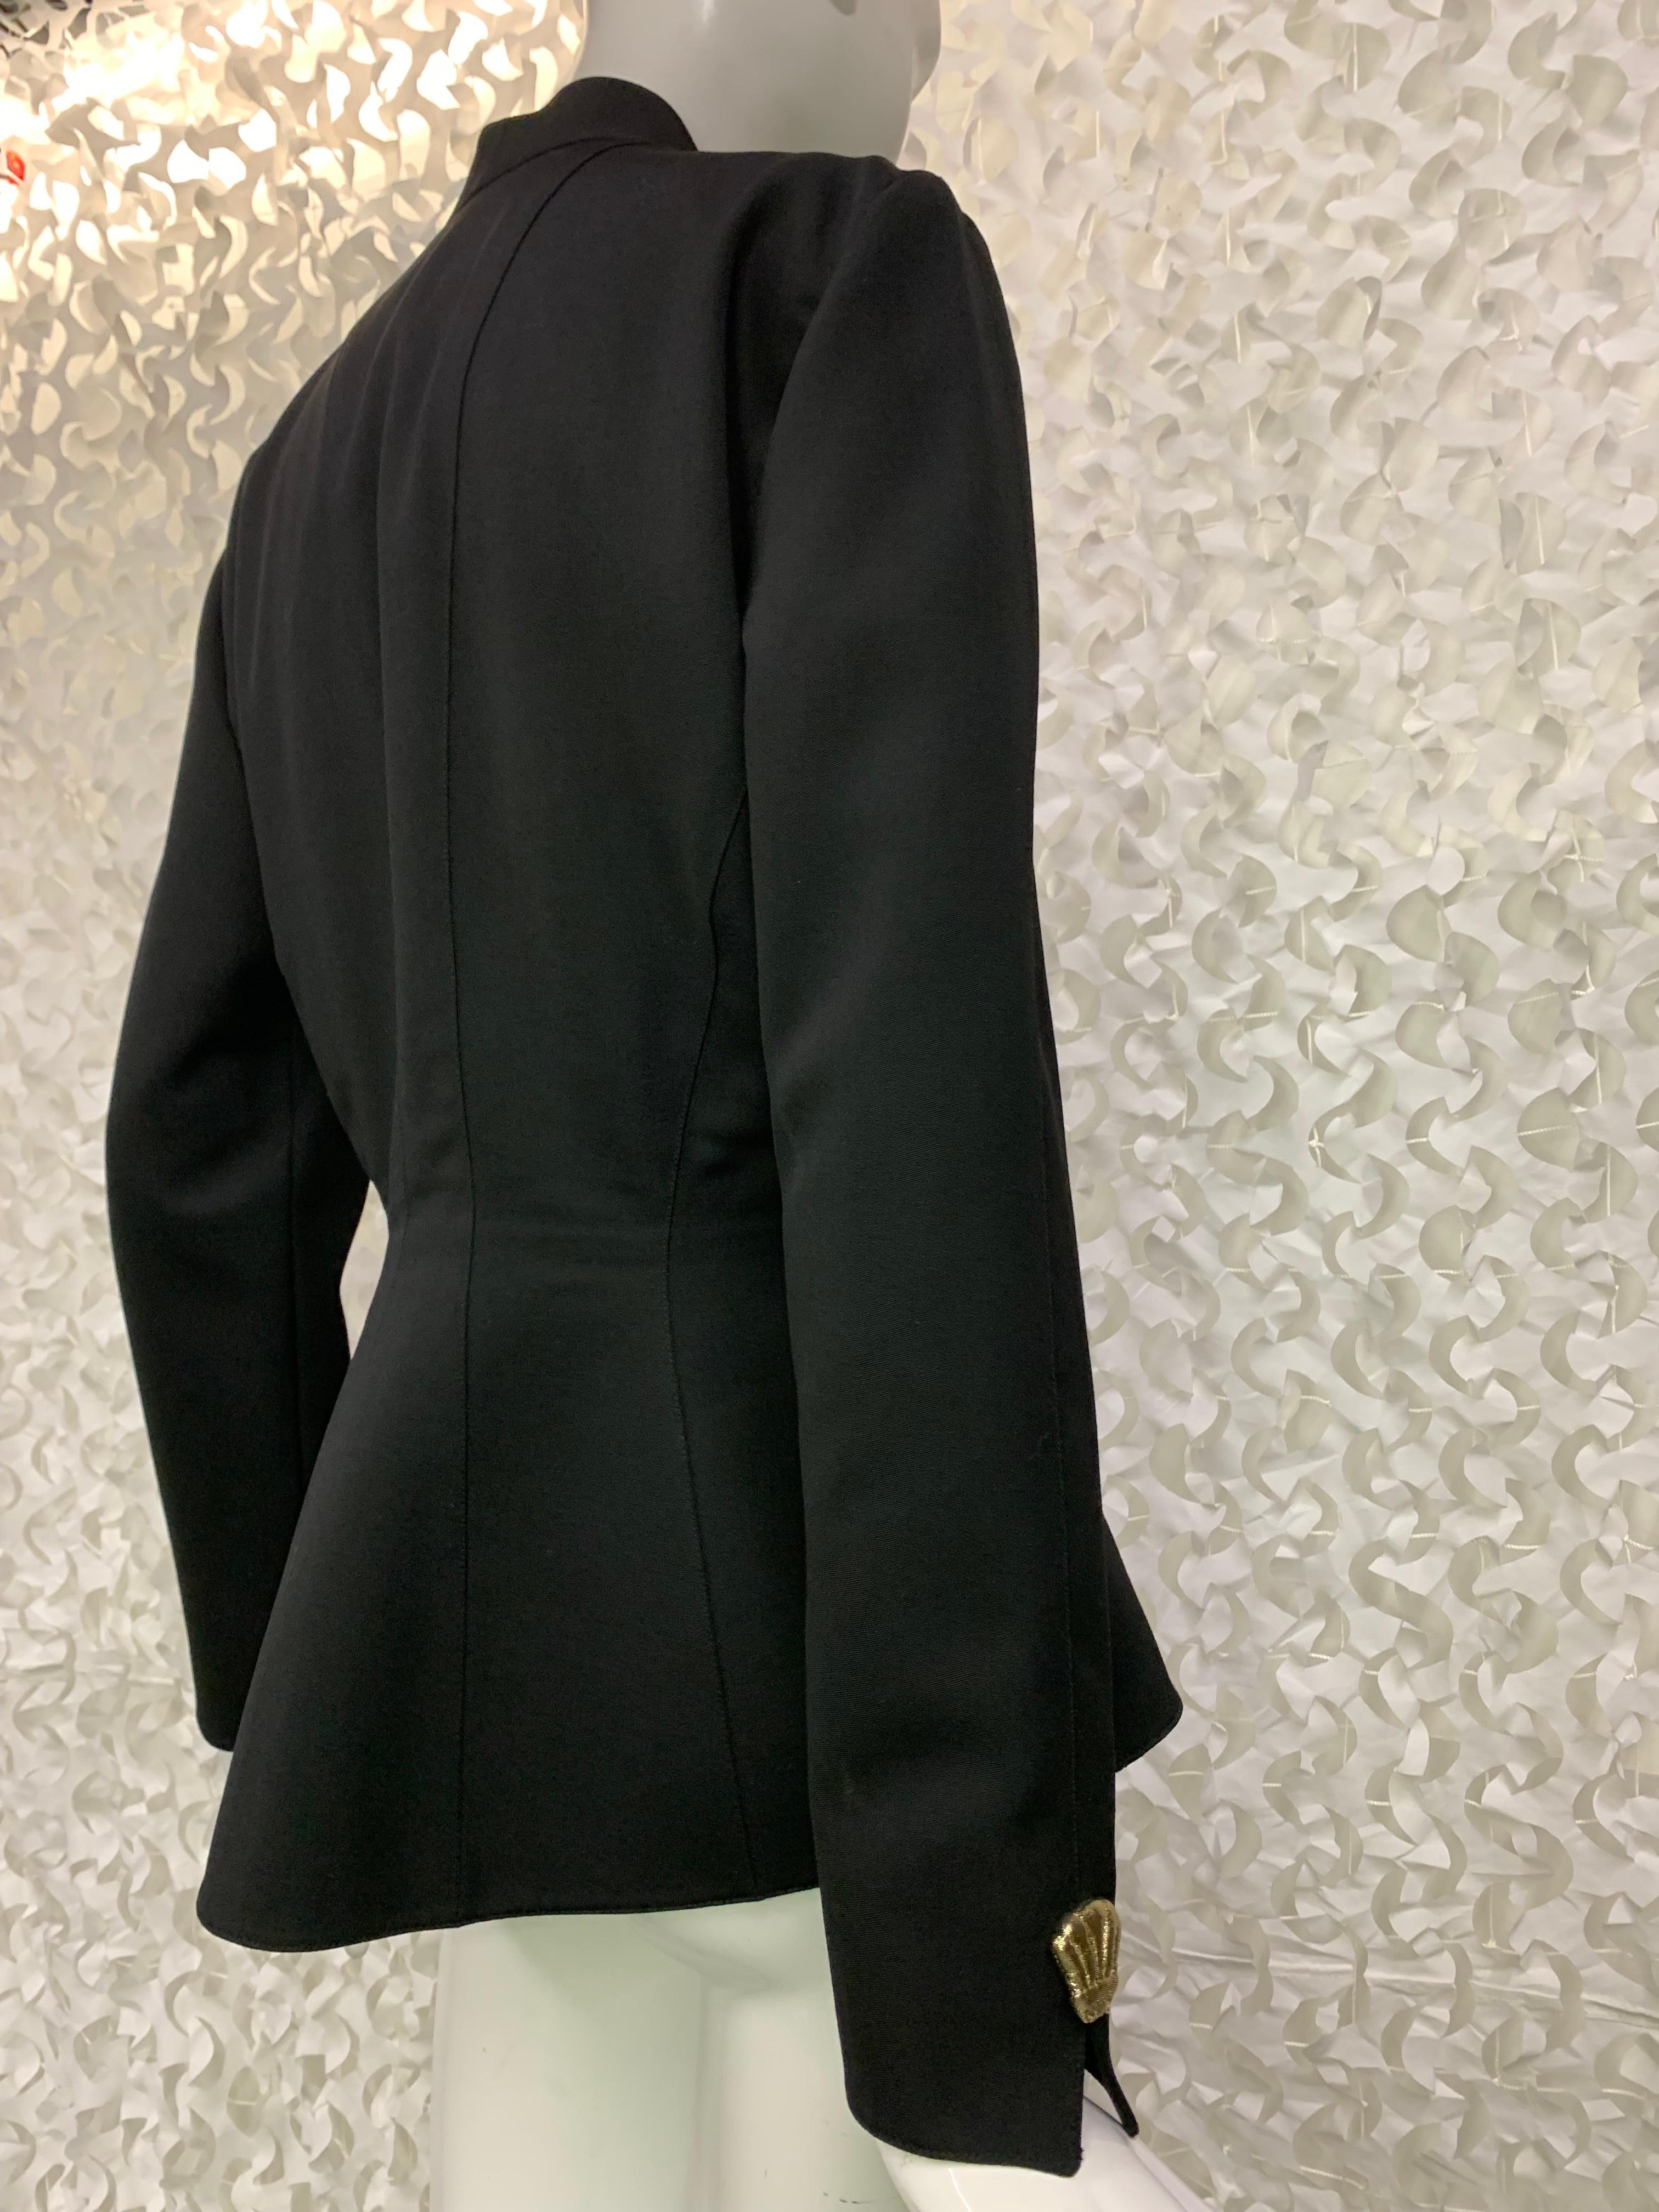 1990s Thierry Mugler Black Wool Crepe Jacket w Gold Lame Fabric Shell Details  2